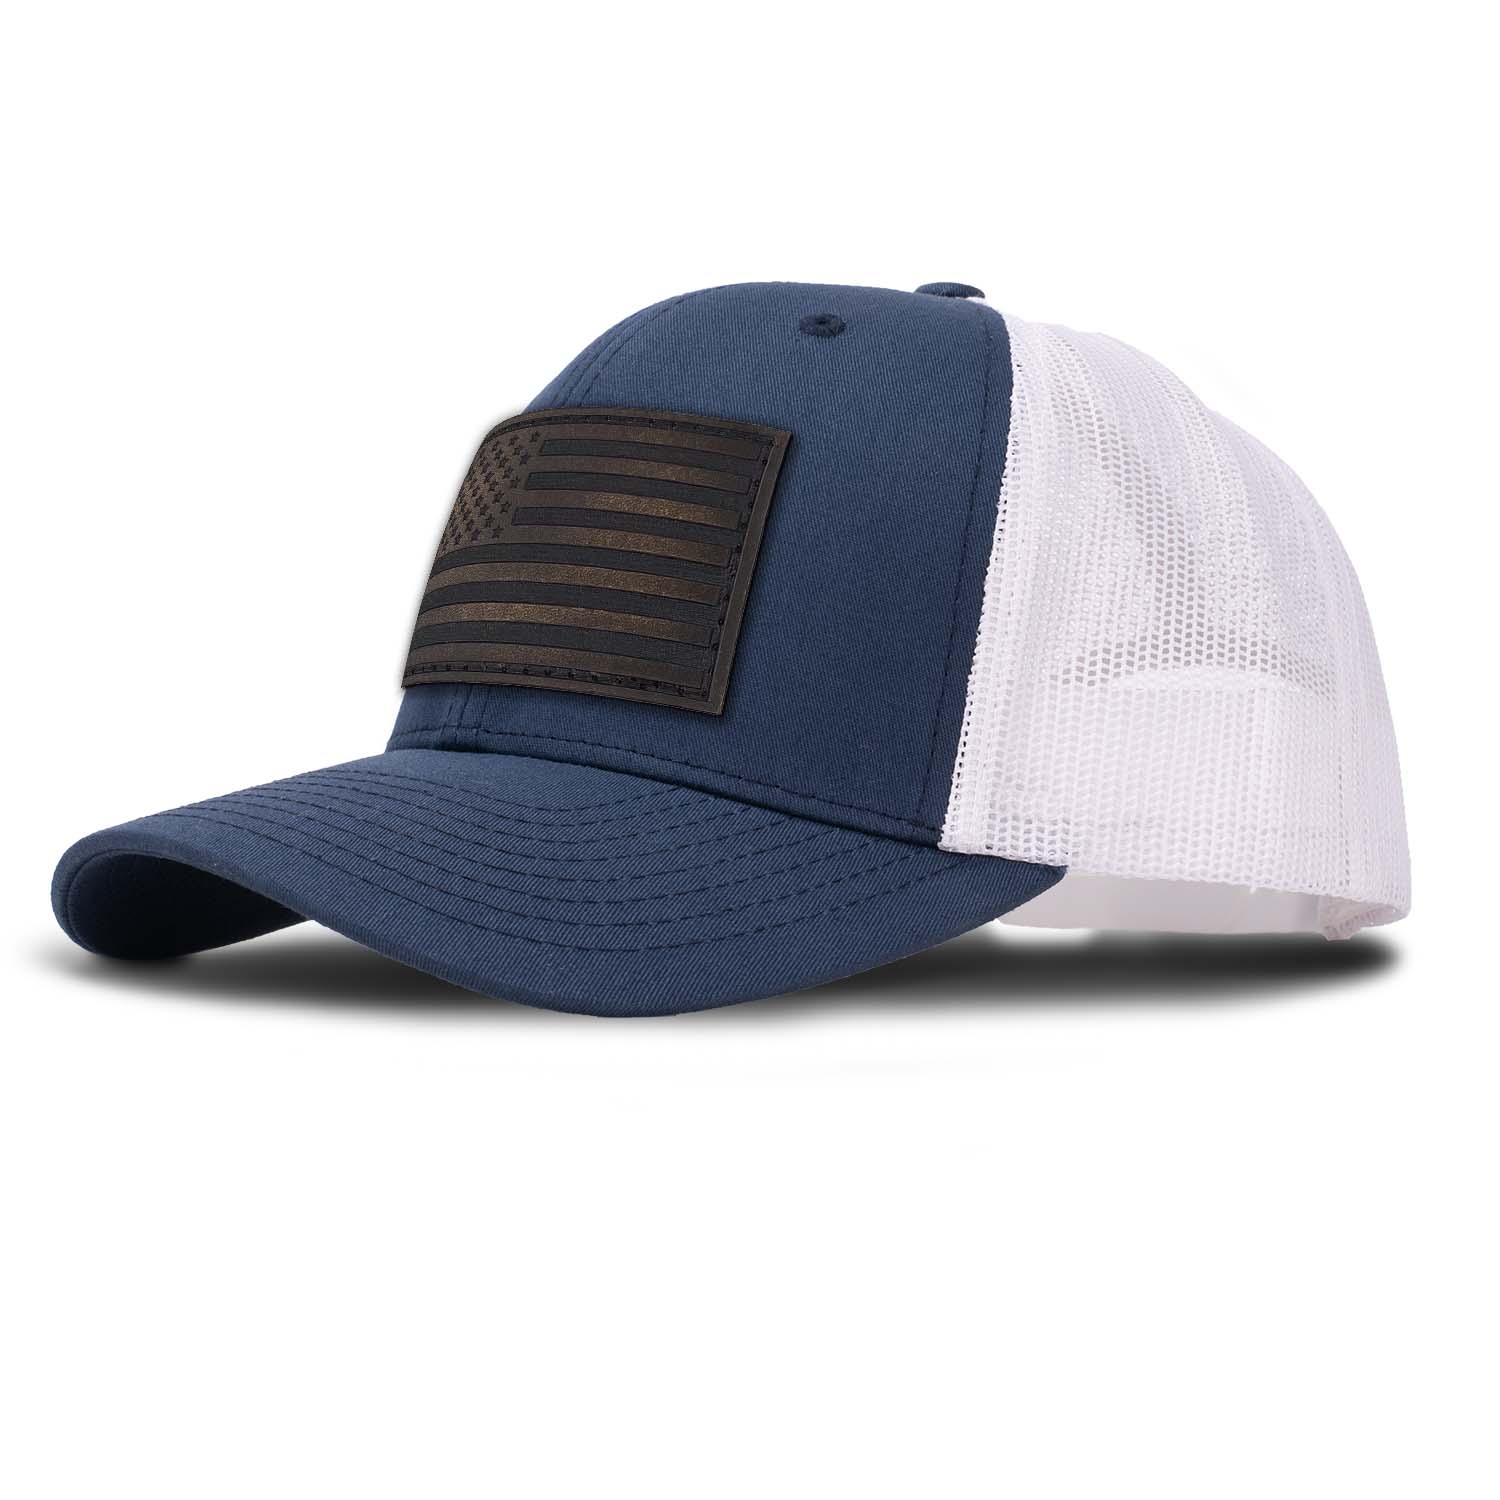 Revolution Mfg classic trucker hat in navy with white mesh with a dark brown full grain leather American flag patch